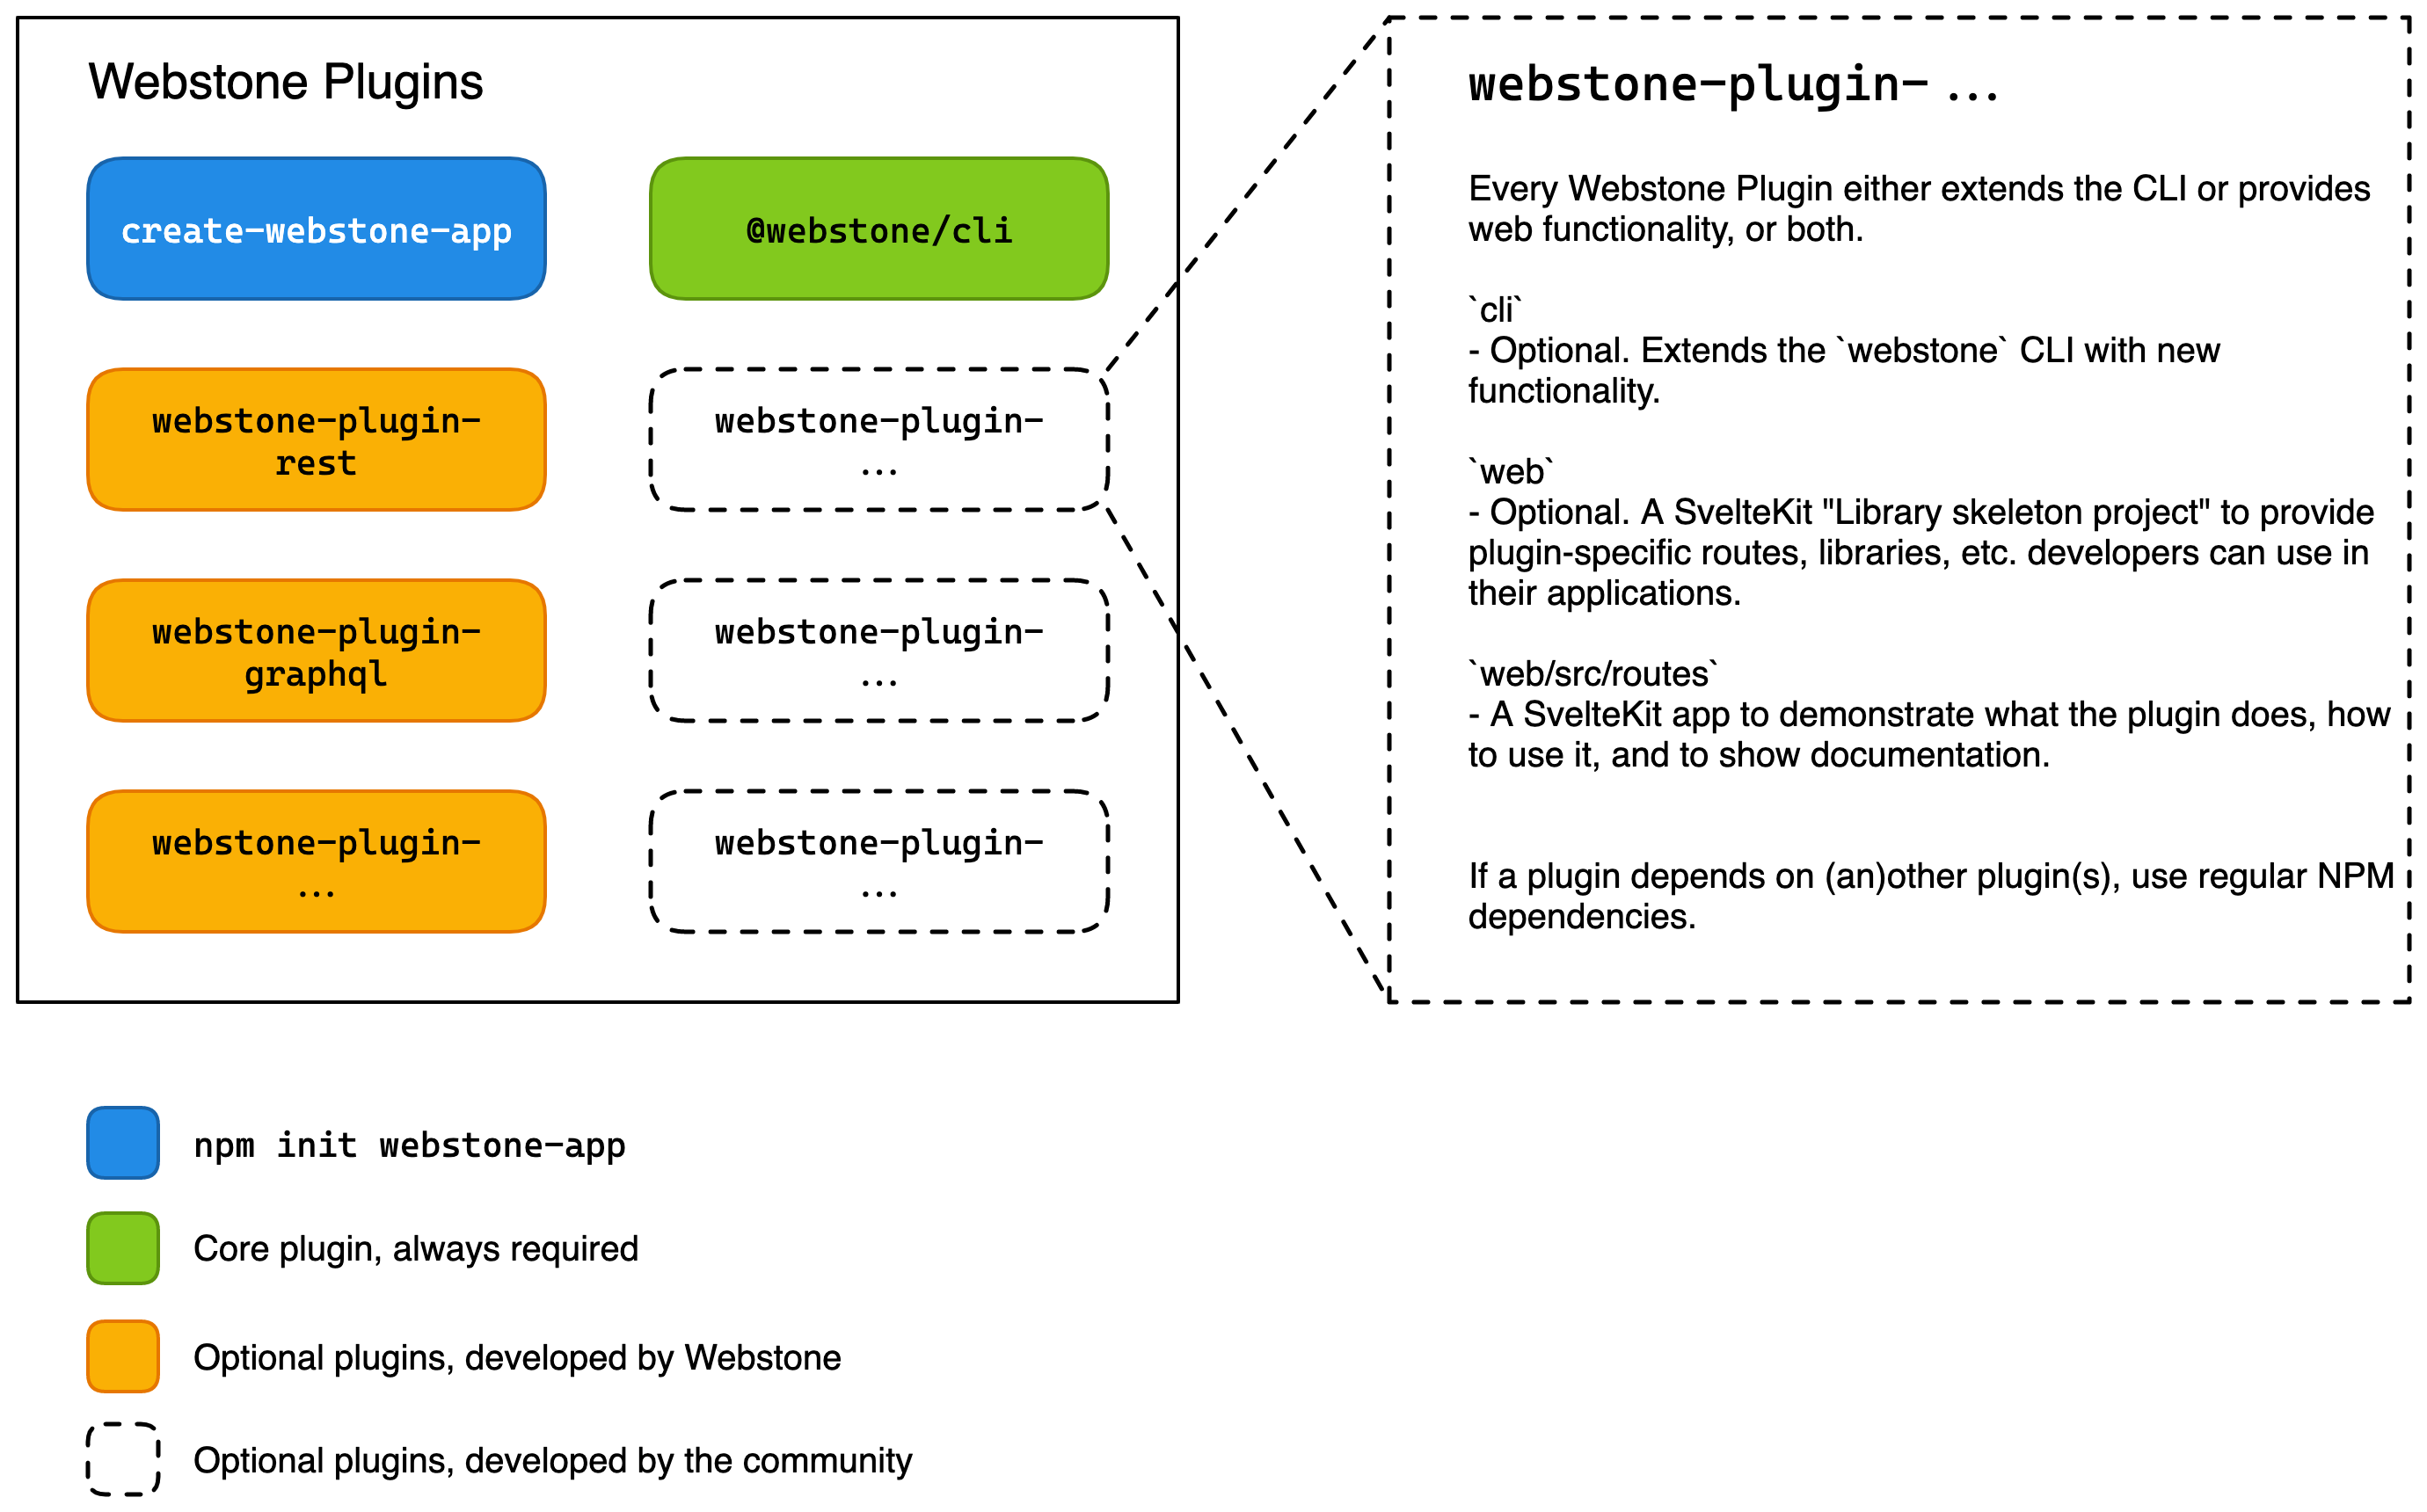 Shows the Webstone Plugins overview where each plugin's name starts with webstone-plugin-, regardless of whether the Webstone team or someone from the community authored a plugin.